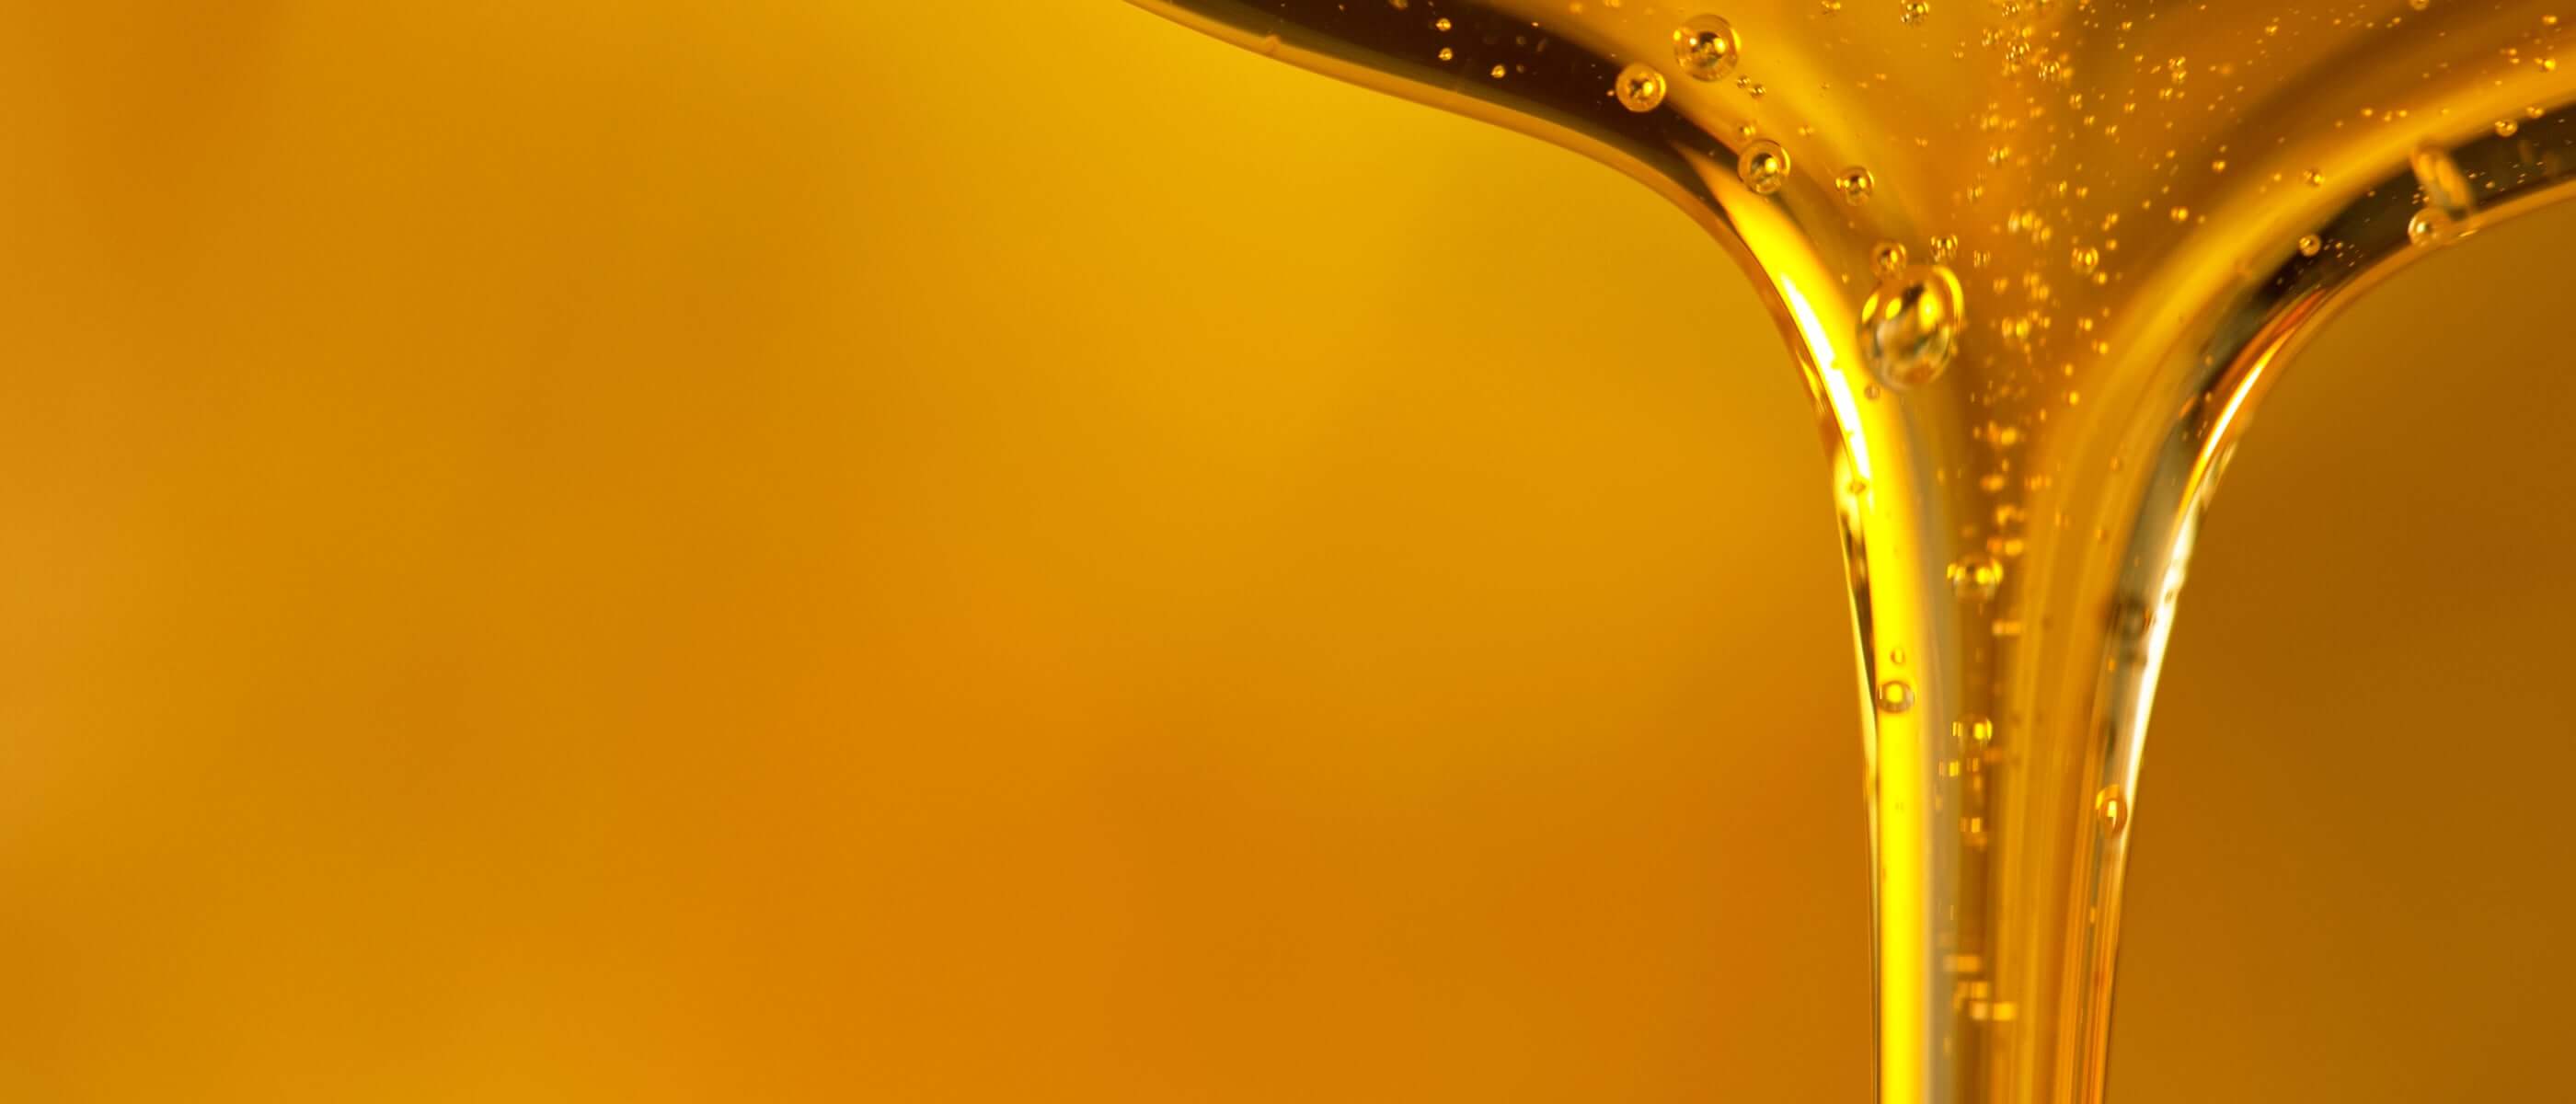 Pouring oil drop on golden background.